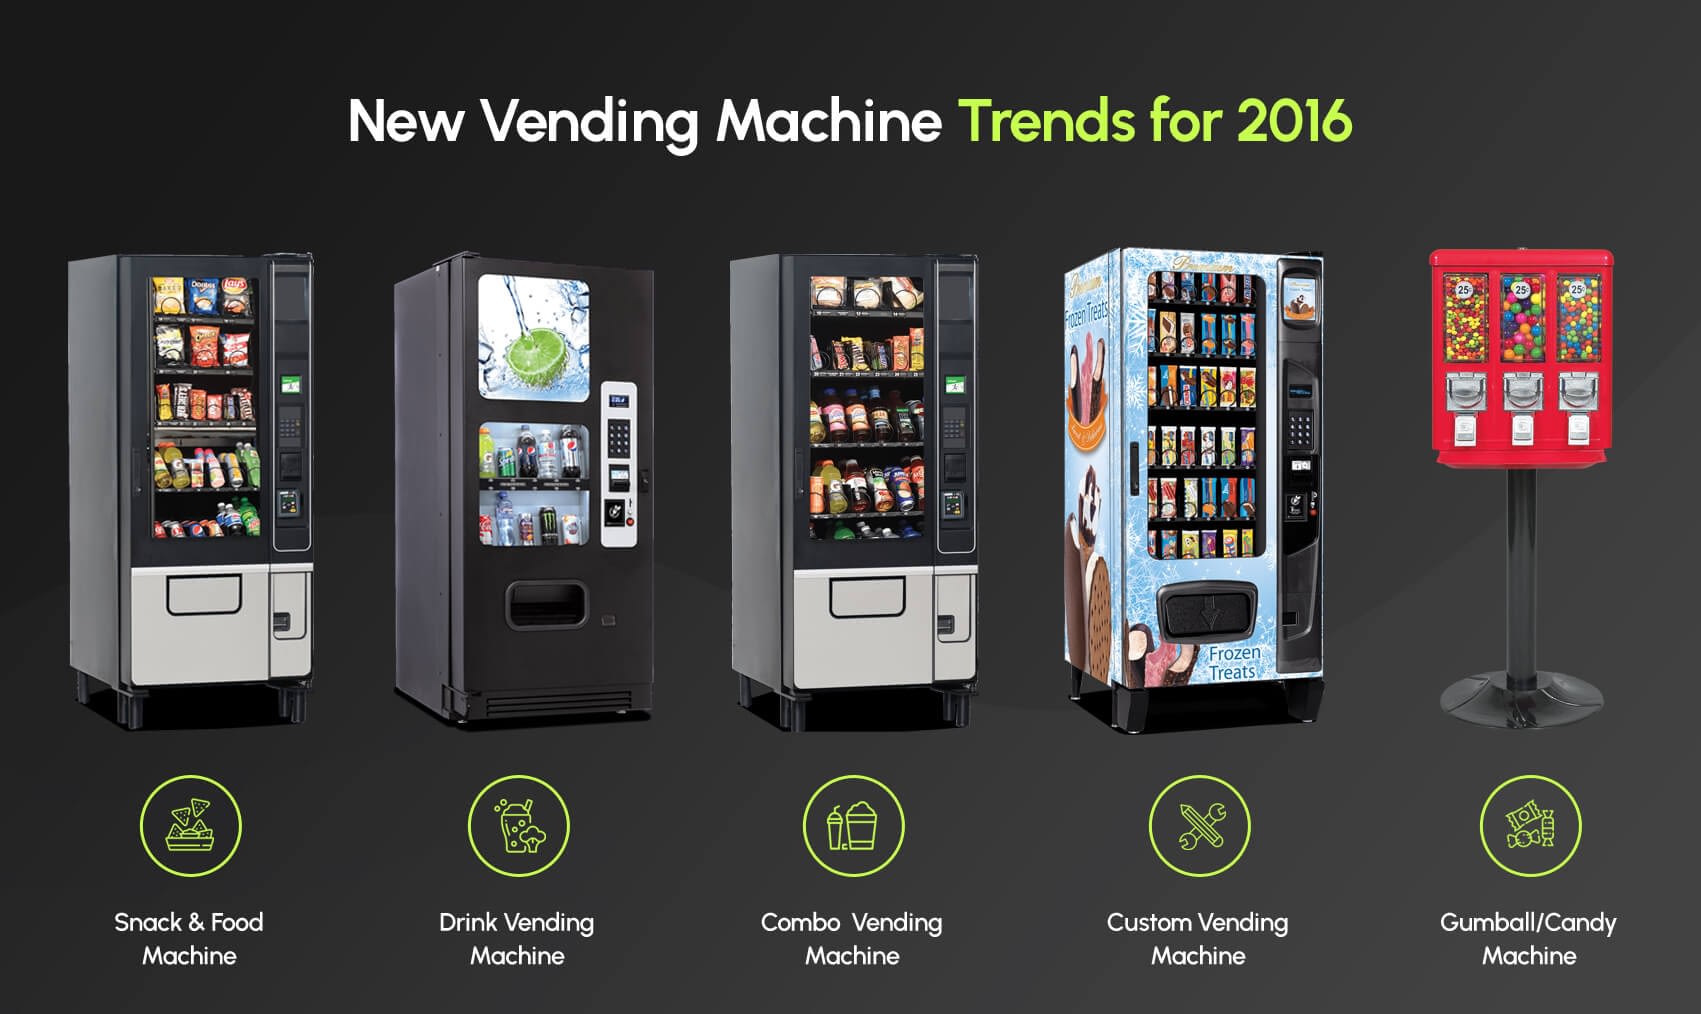 New Vending Machine Trends for 2016